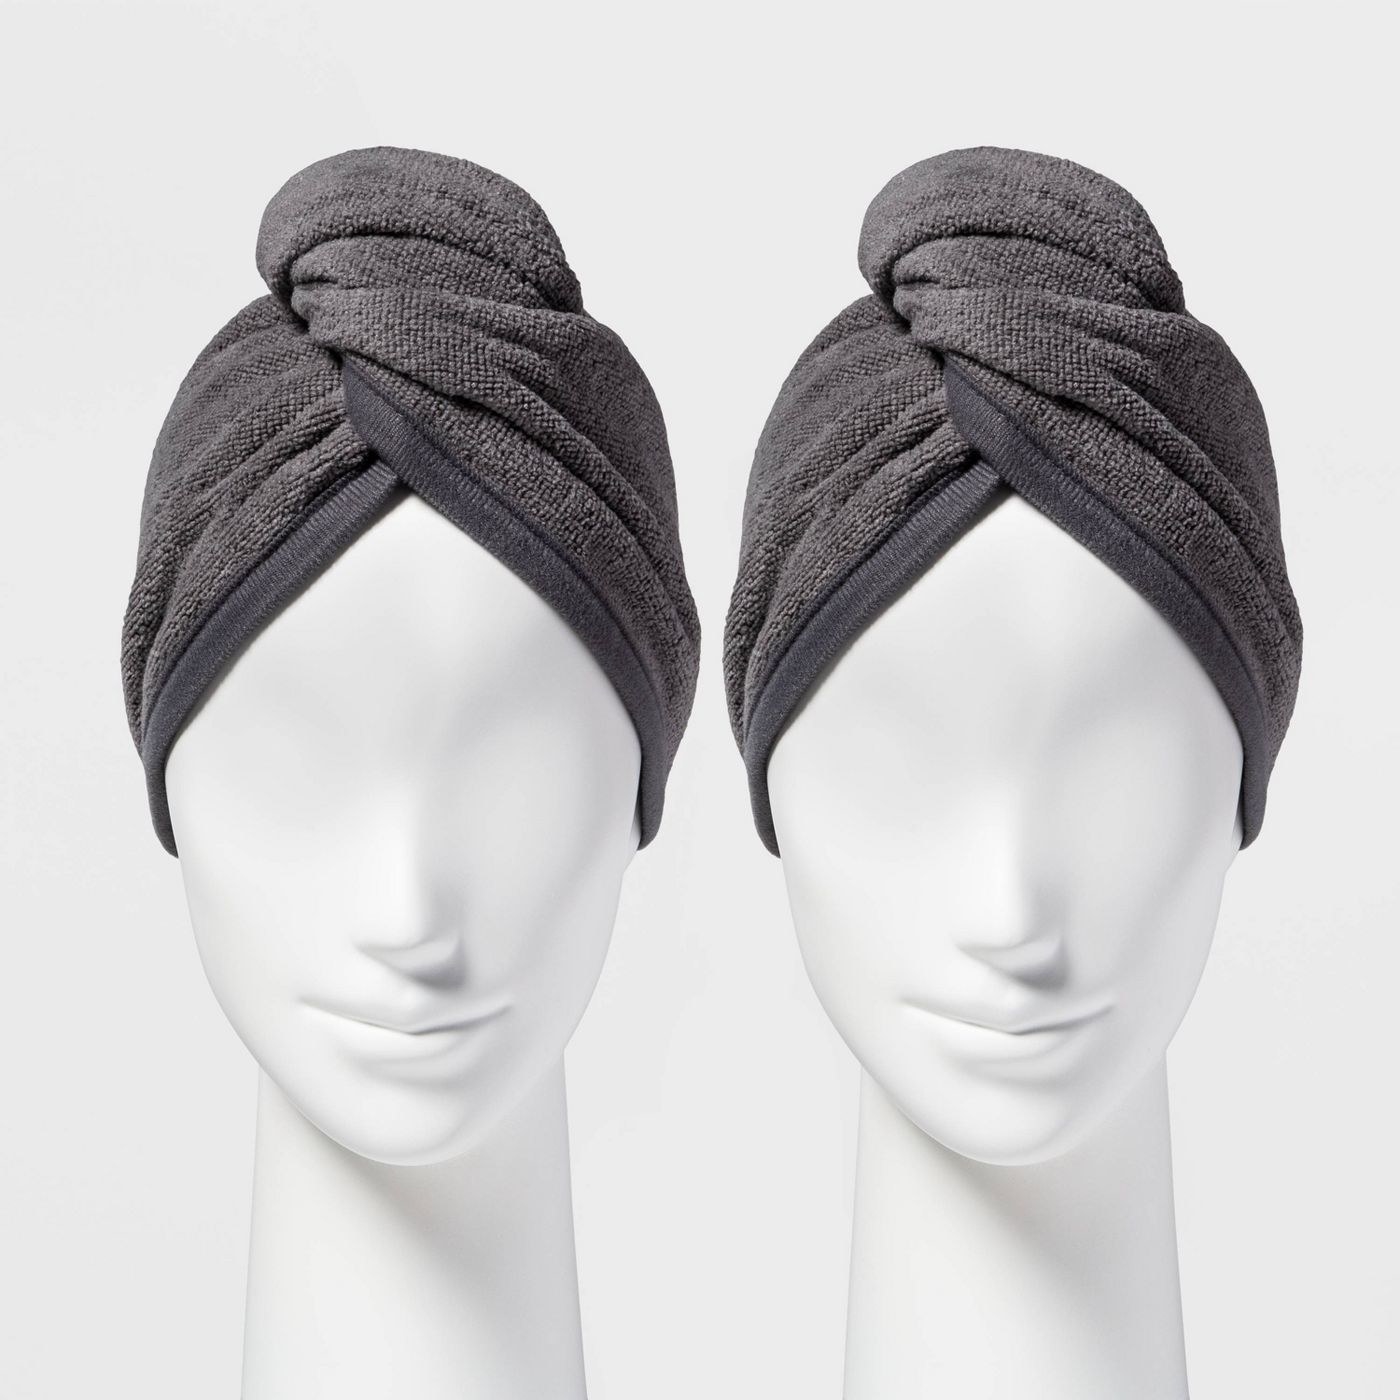 An image of two mannequins wearing grey bath hair wraps